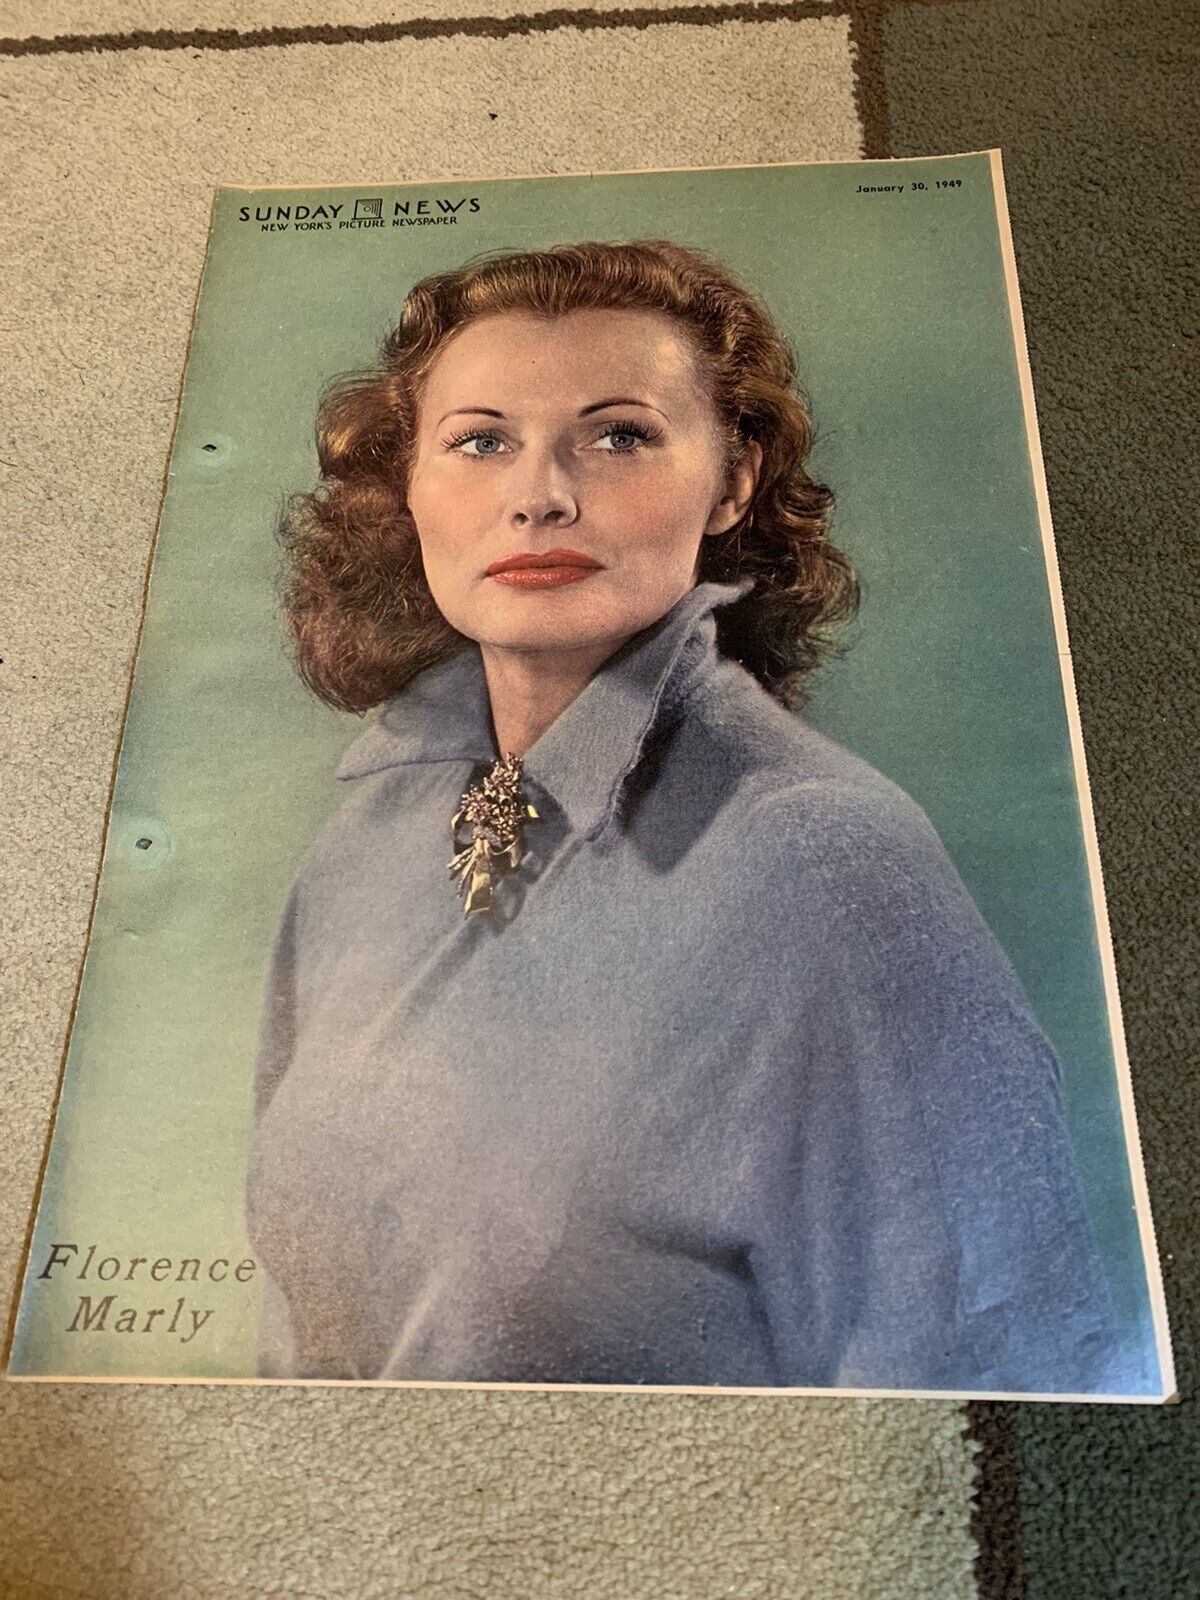 FLORENCE MARLY original color portrait SUNDAY NEWS 1/30/49 NY Picture Newspaper